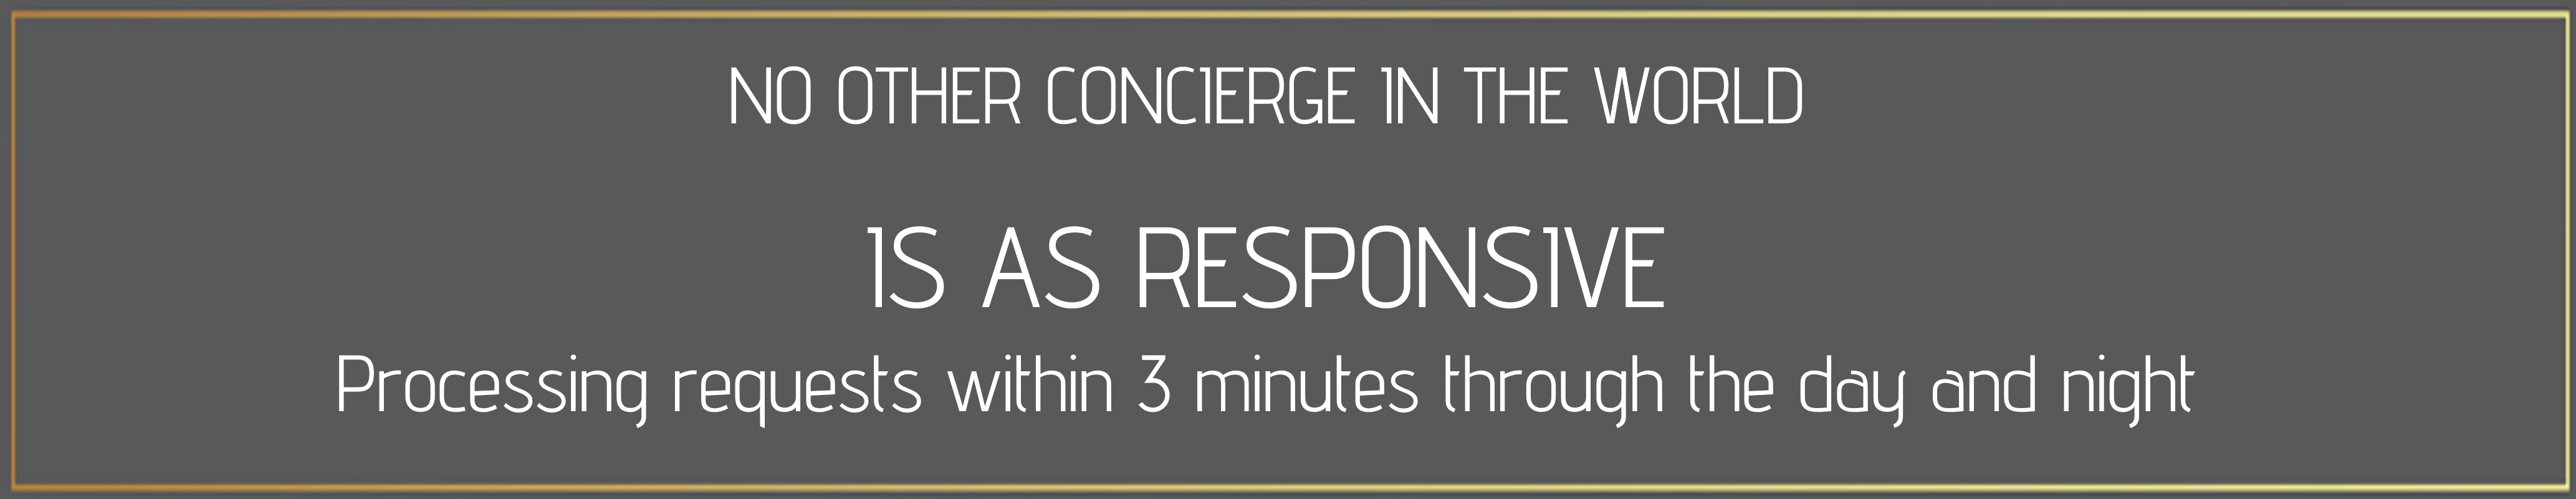 sincura concierge has the fastest turnaround of requests and is the most responsive